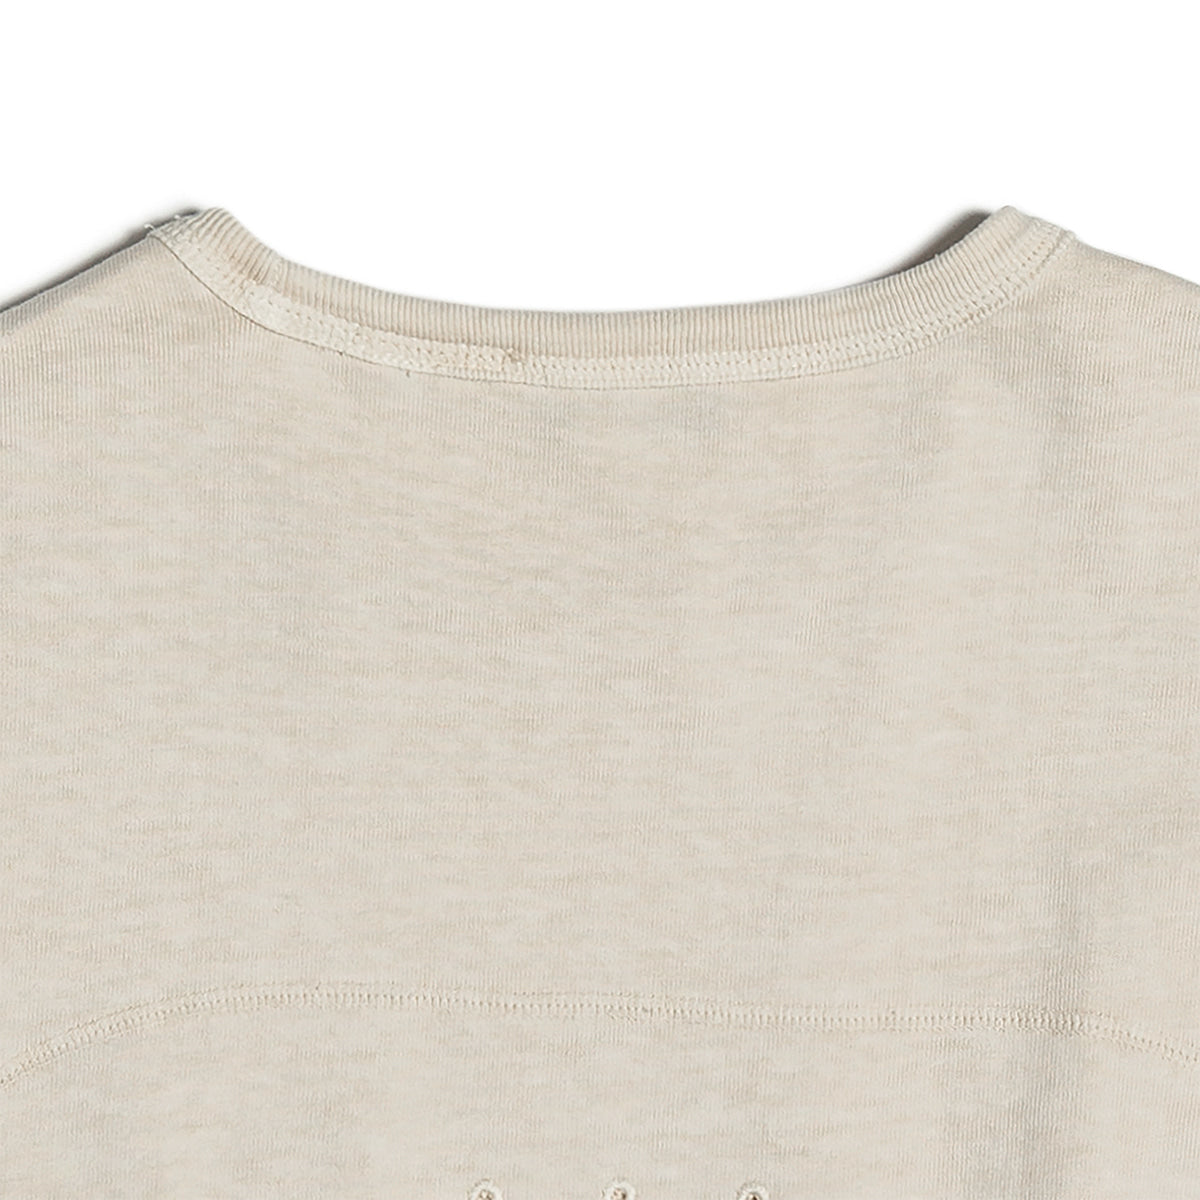 EASTLOGUE 2021SSCS05 COVER STITCH T-SHIRT - CREAM